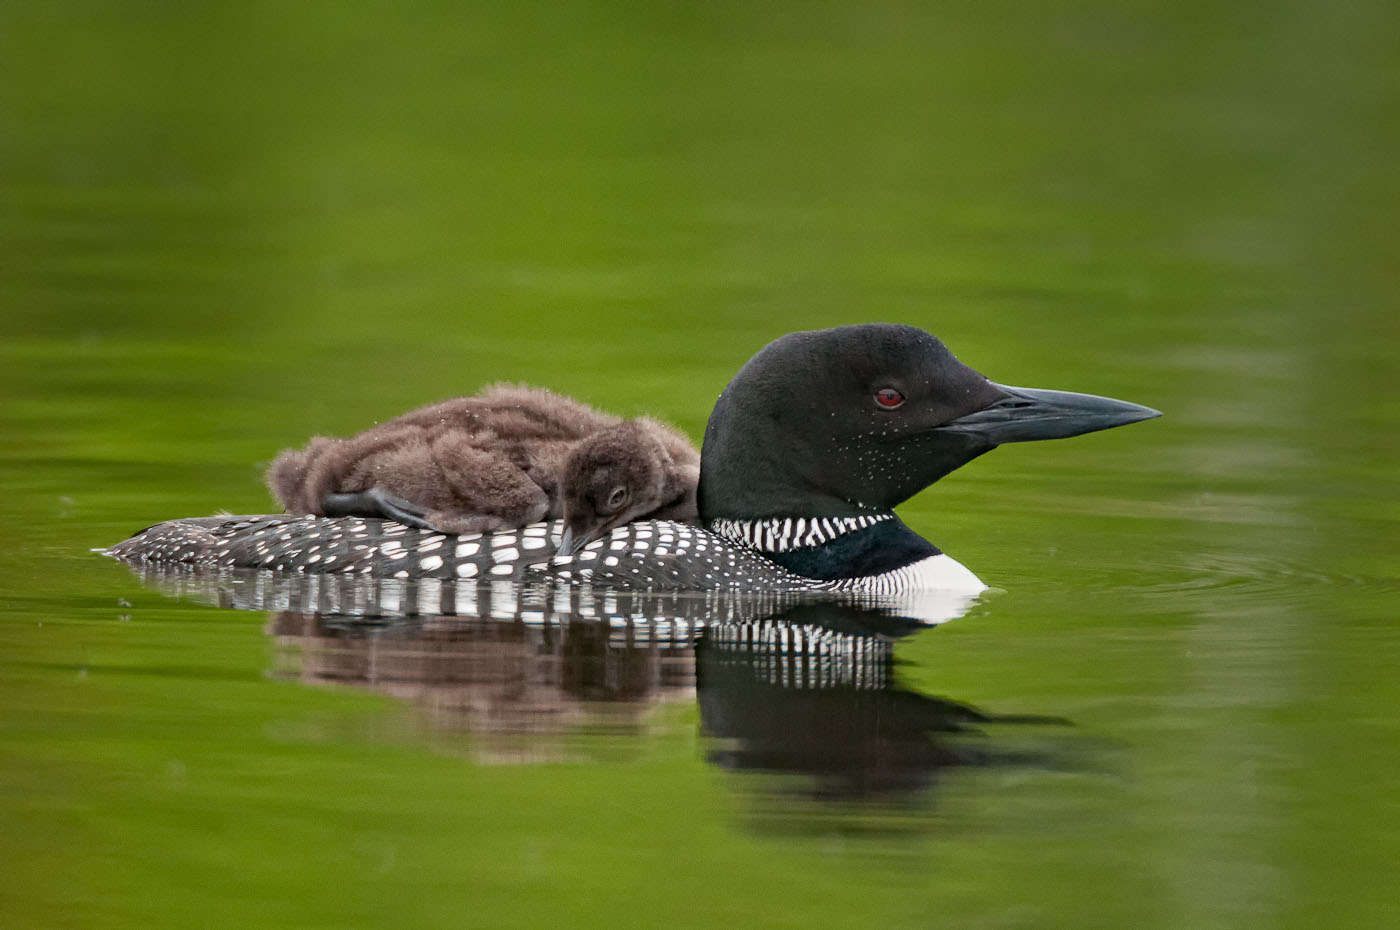 Tired loon chick (Gavia immer) gets a ride on parent's back